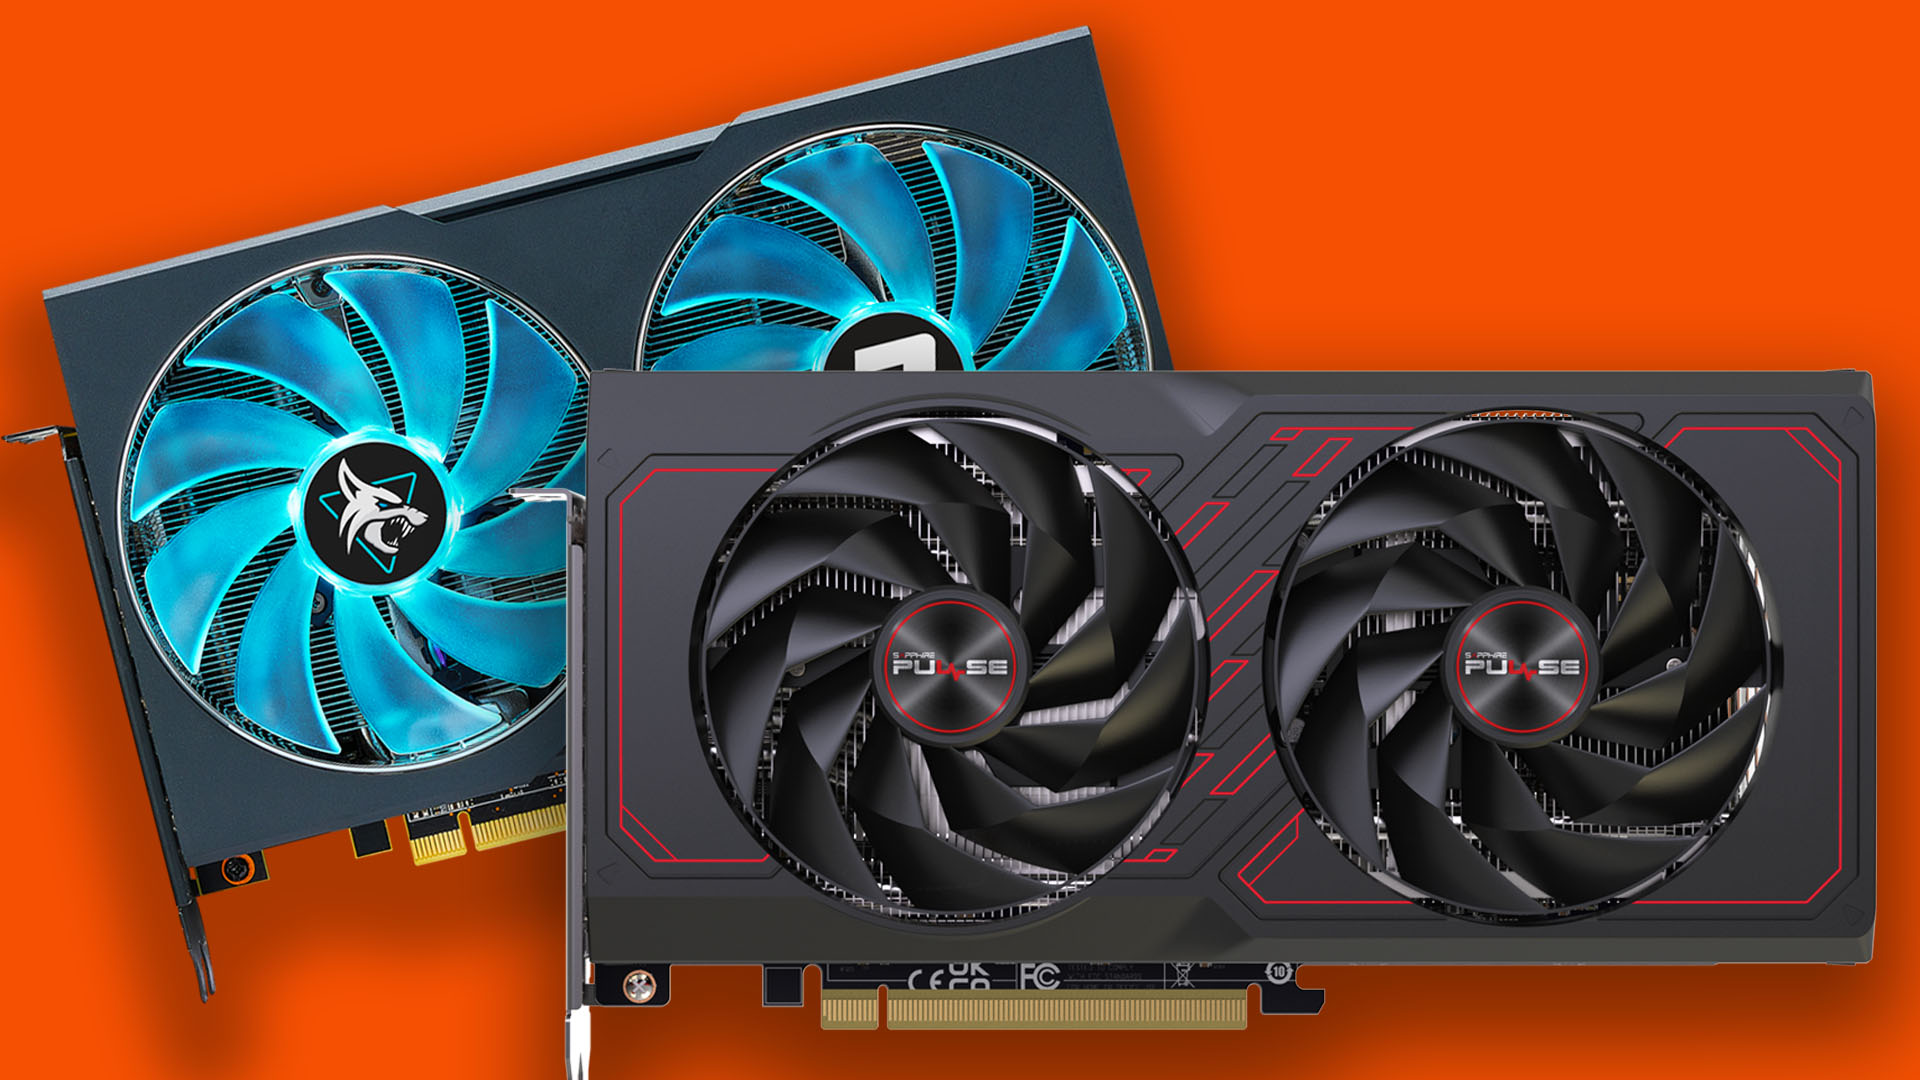 AMD Radeon RX 7600 XT now available at $329 - IG News